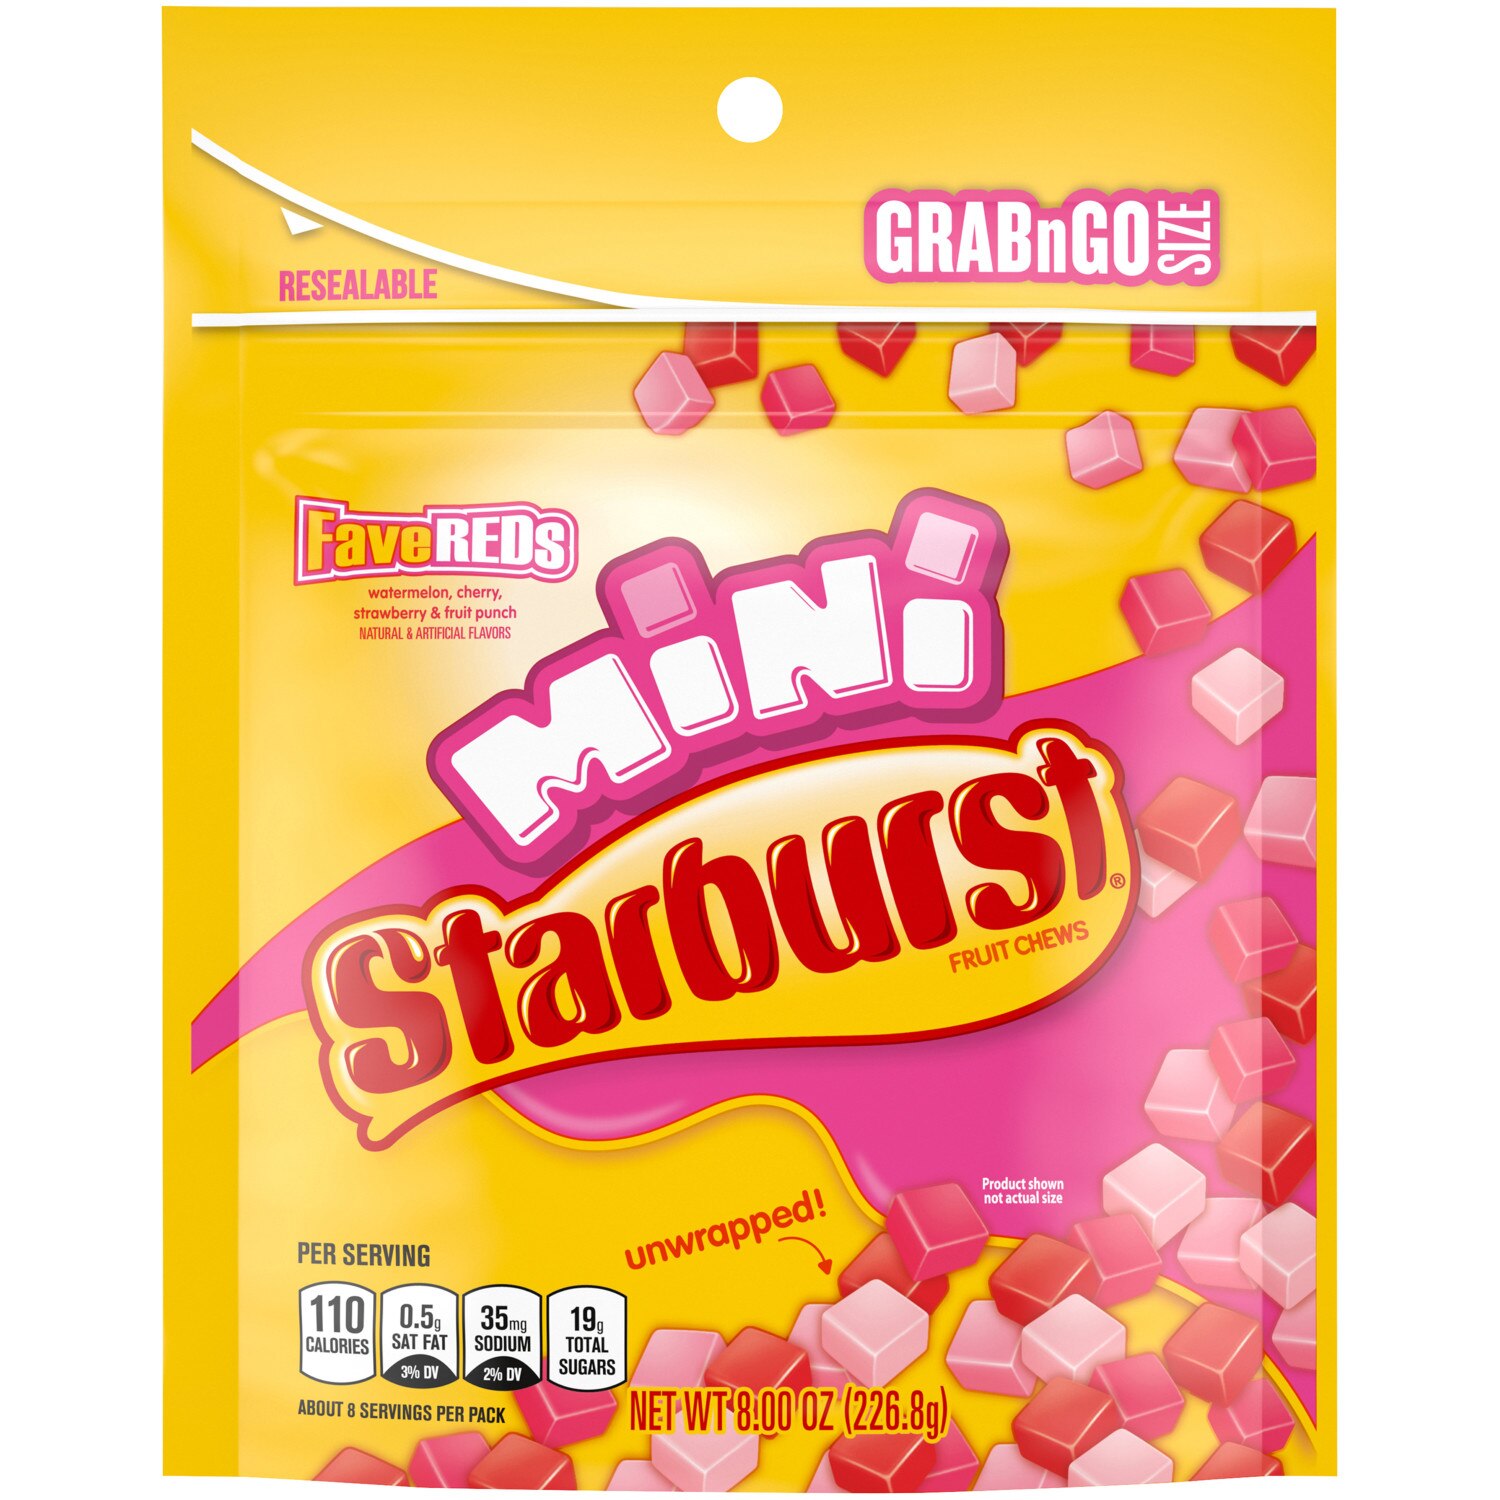 Starbursts FaveREDs Fruit Chewy Candy Grab N Go, 8 OZ